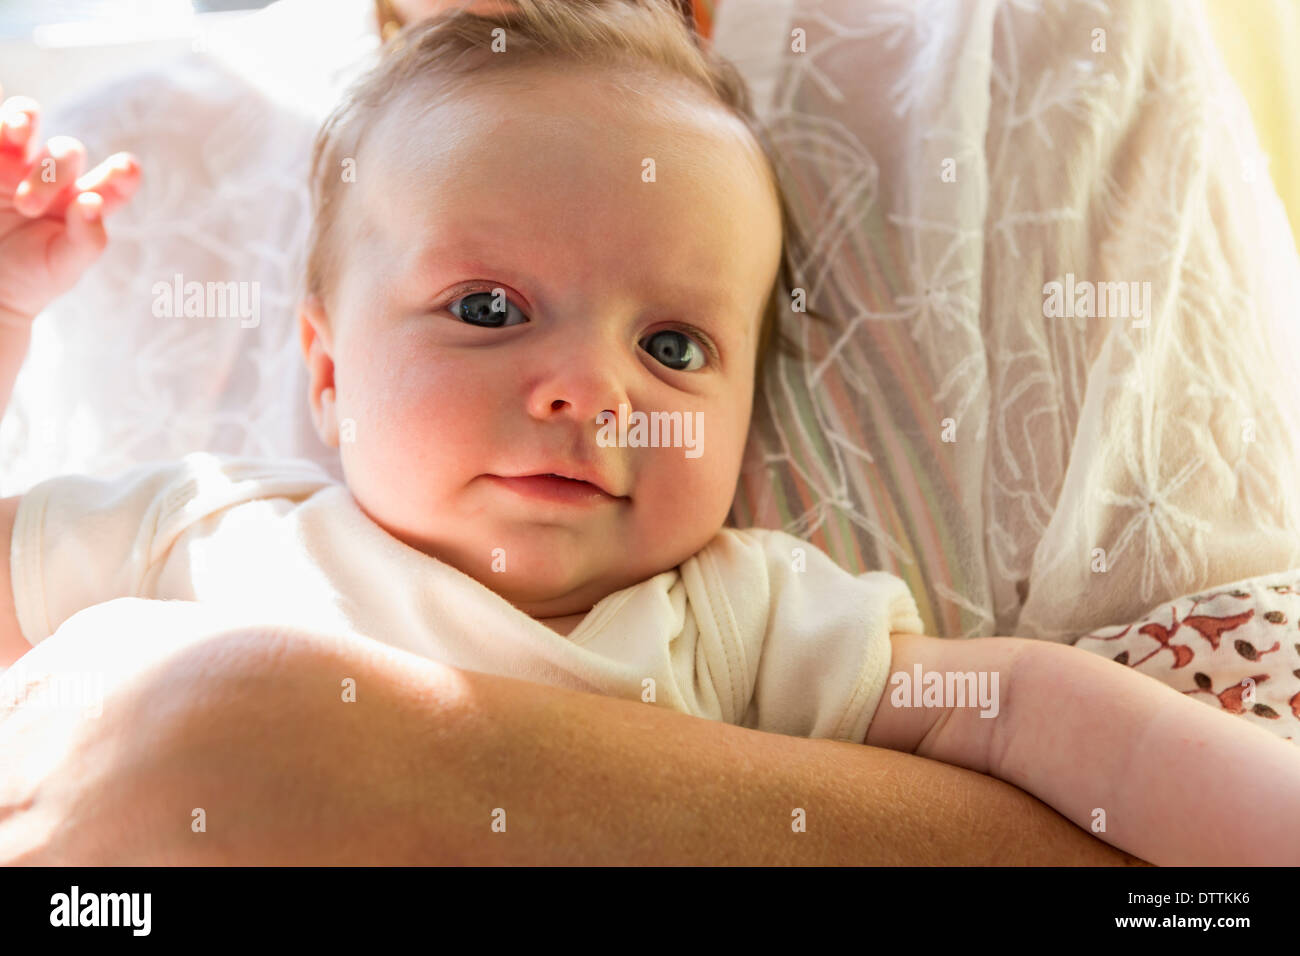 Mother holding smiling baby Stock Photo